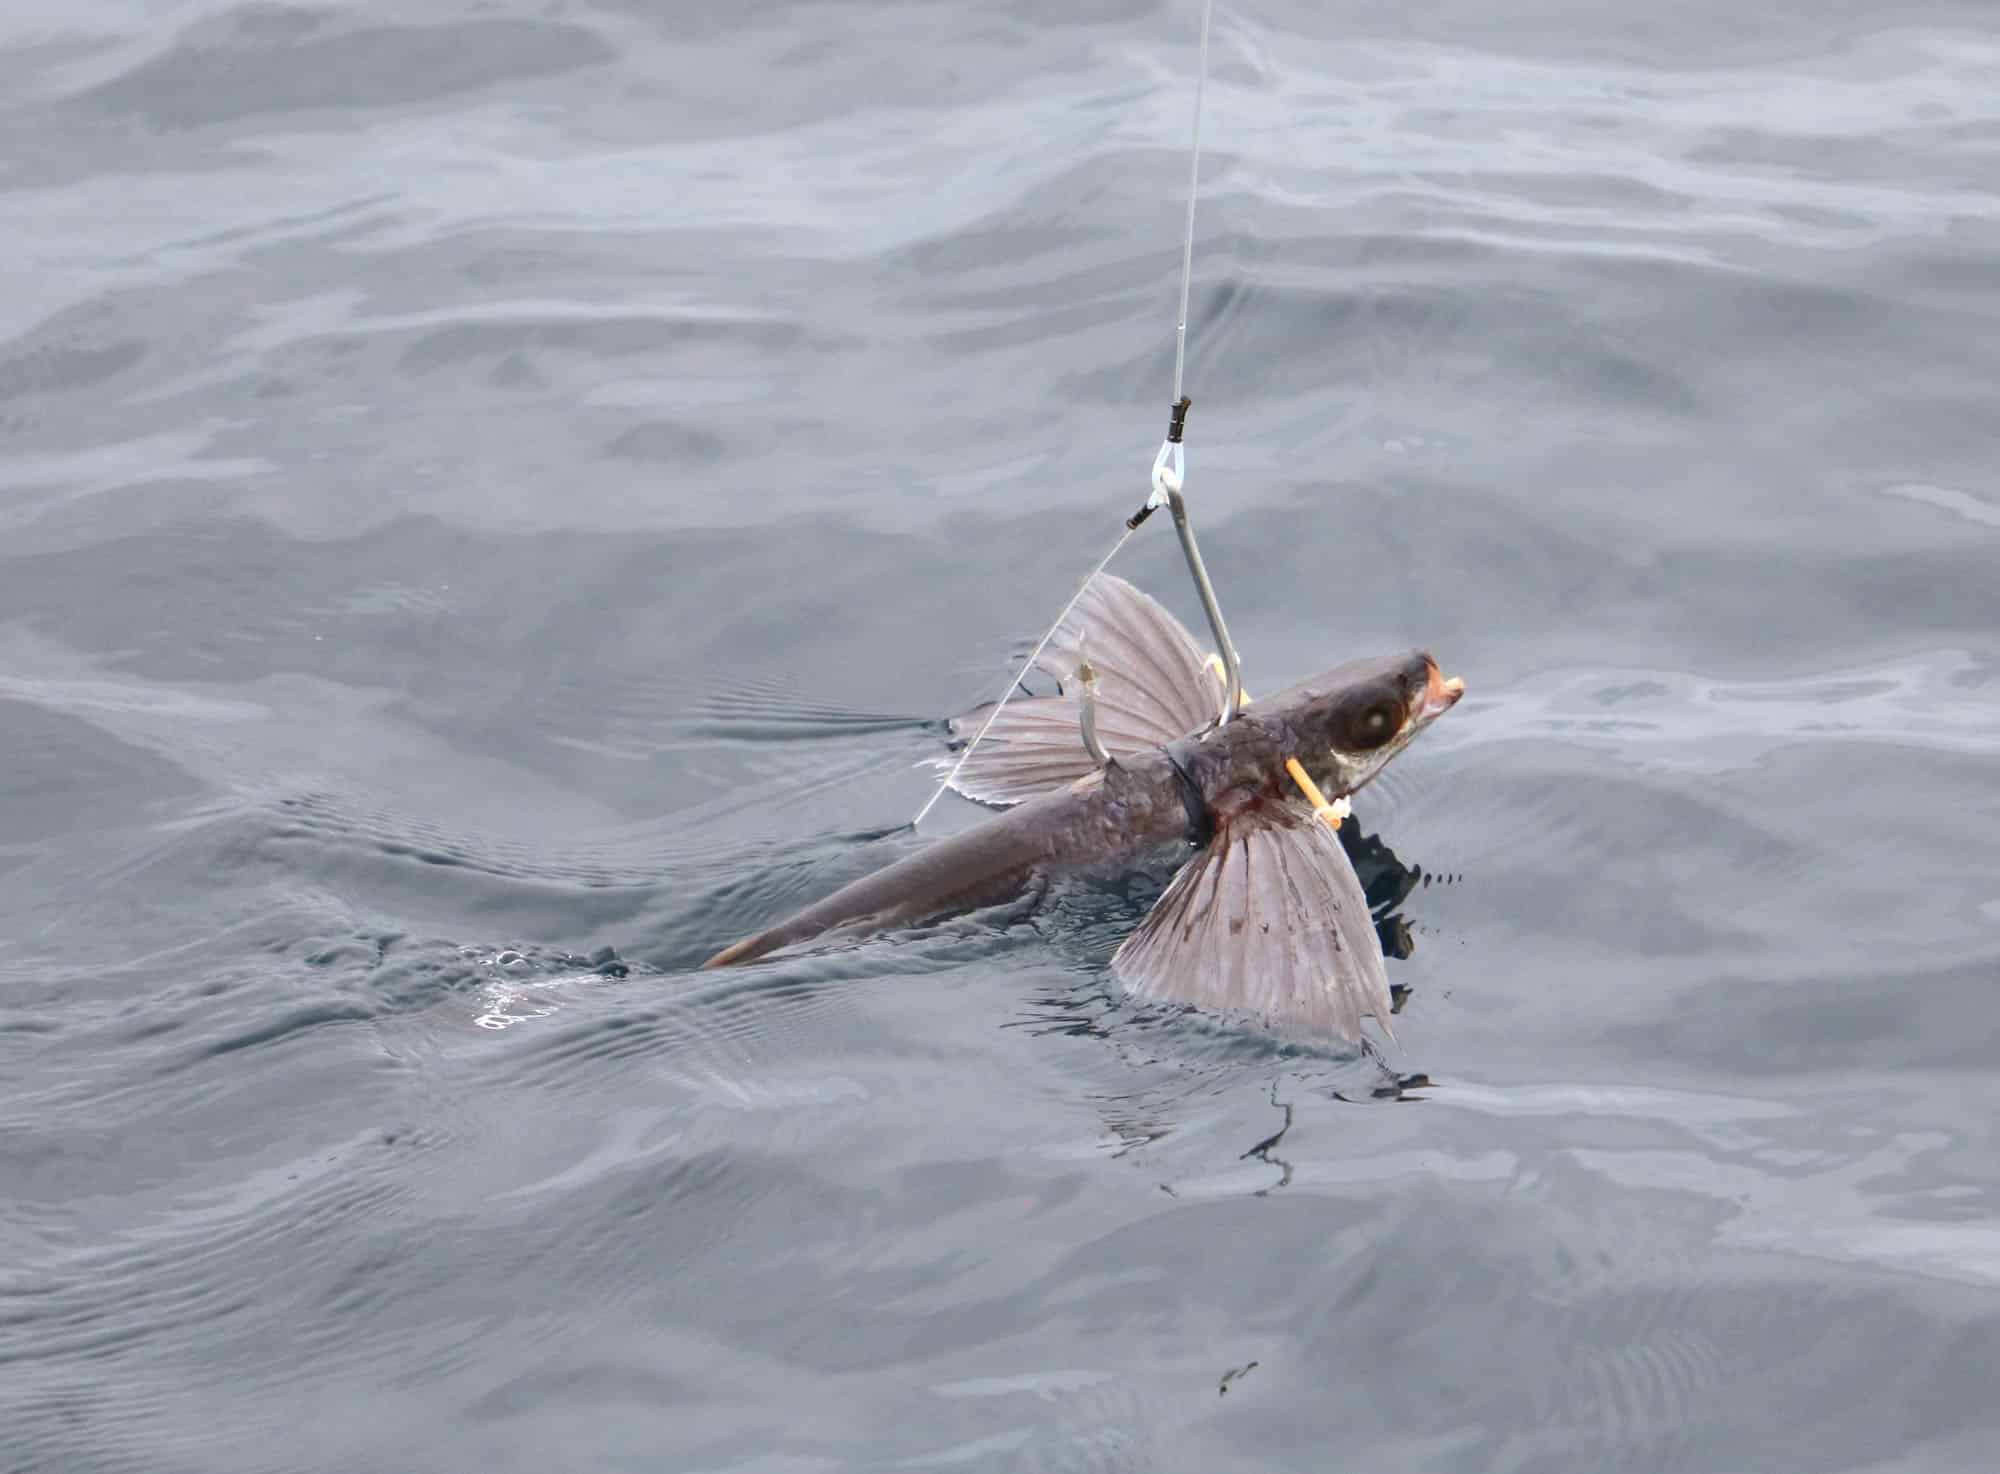 How to Rig a Flying Fish for Kite Fishing